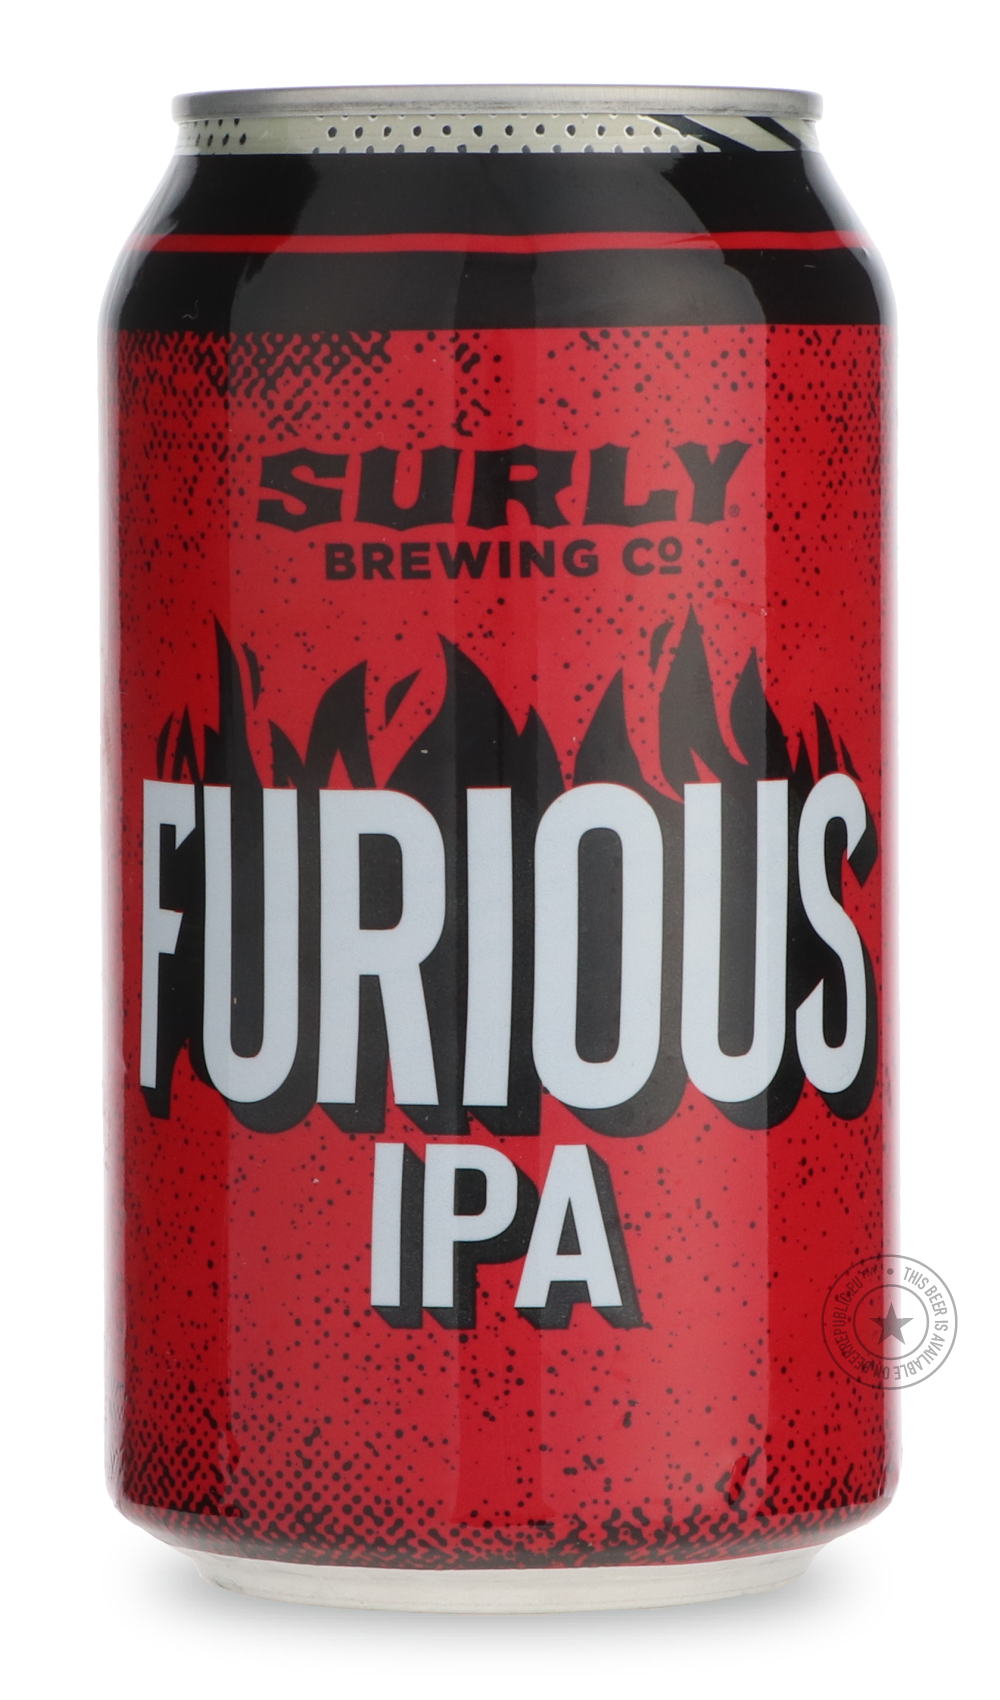 -Surly- Furious-IPA- Only @ Beer Republic - The best online beer store for American & Canadian craft beer - Buy beer online from the USA and Canada - Bier online kopen - Amerikaans bier kopen - Craft beer store - Craft beer kopen - Amerikanisch bier kaufen - Bier online kaufen - Acheter biere online - IPA - Stout - Porter - New England IPA - Hazy IPA - Imperial Stout - Barrel Aged - Barrel Aged Imperial Stout - Brown - Dark beer - Blond - Blonde - Pilsner - Lager - Wheat - Weizen - Amber - Barley Wine - Qua